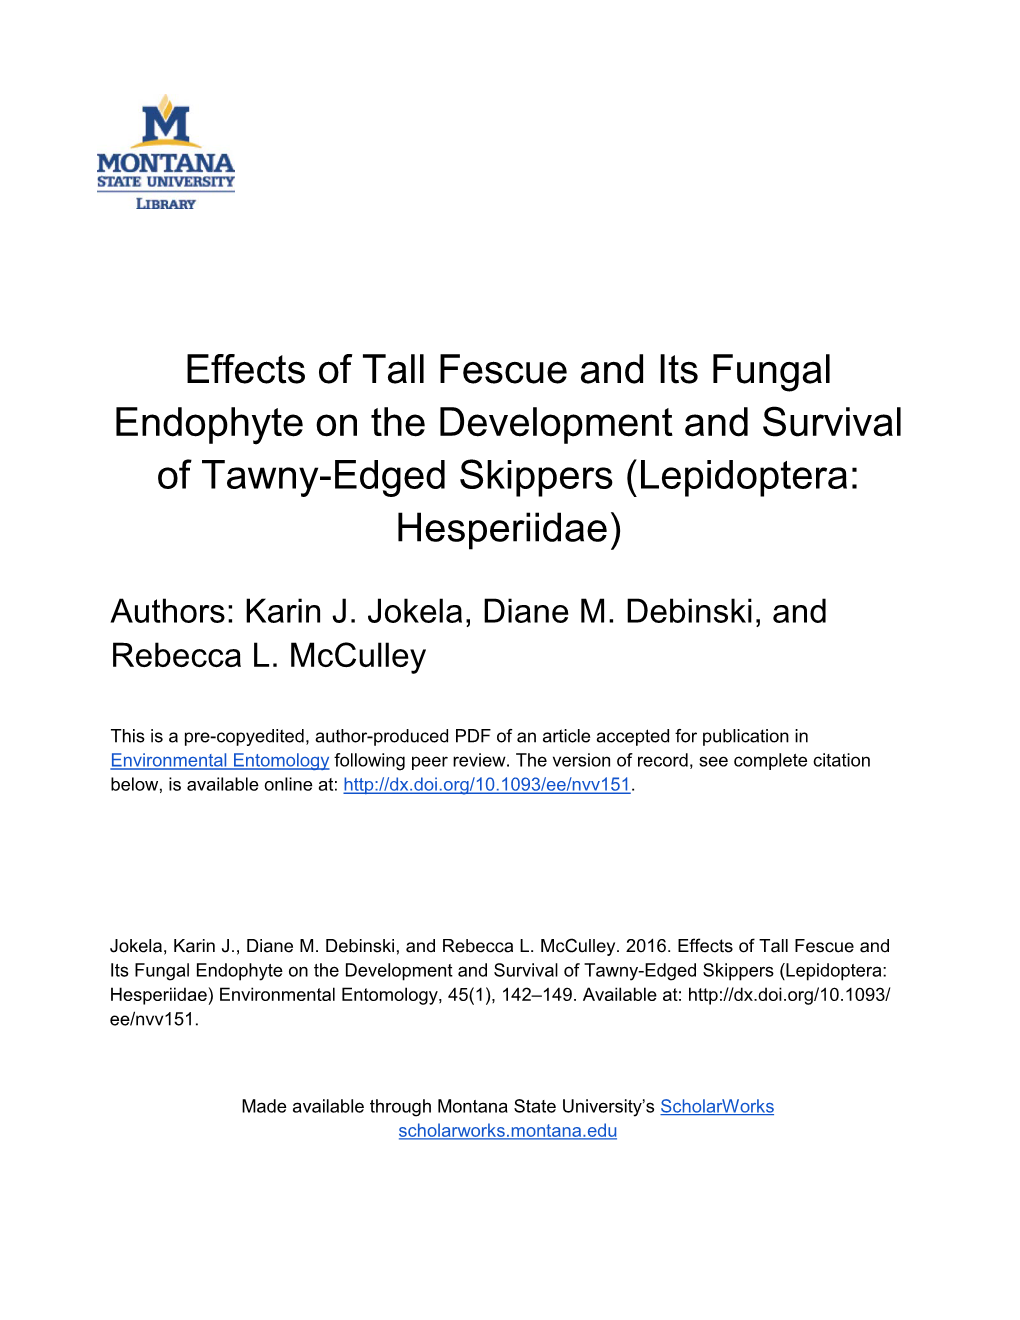 Effects of Tall Fescue and Its Fungal Endophyte on the Development and Survival of Tawny-Edged Skippers (Lepidoptera: Hesperiidae)